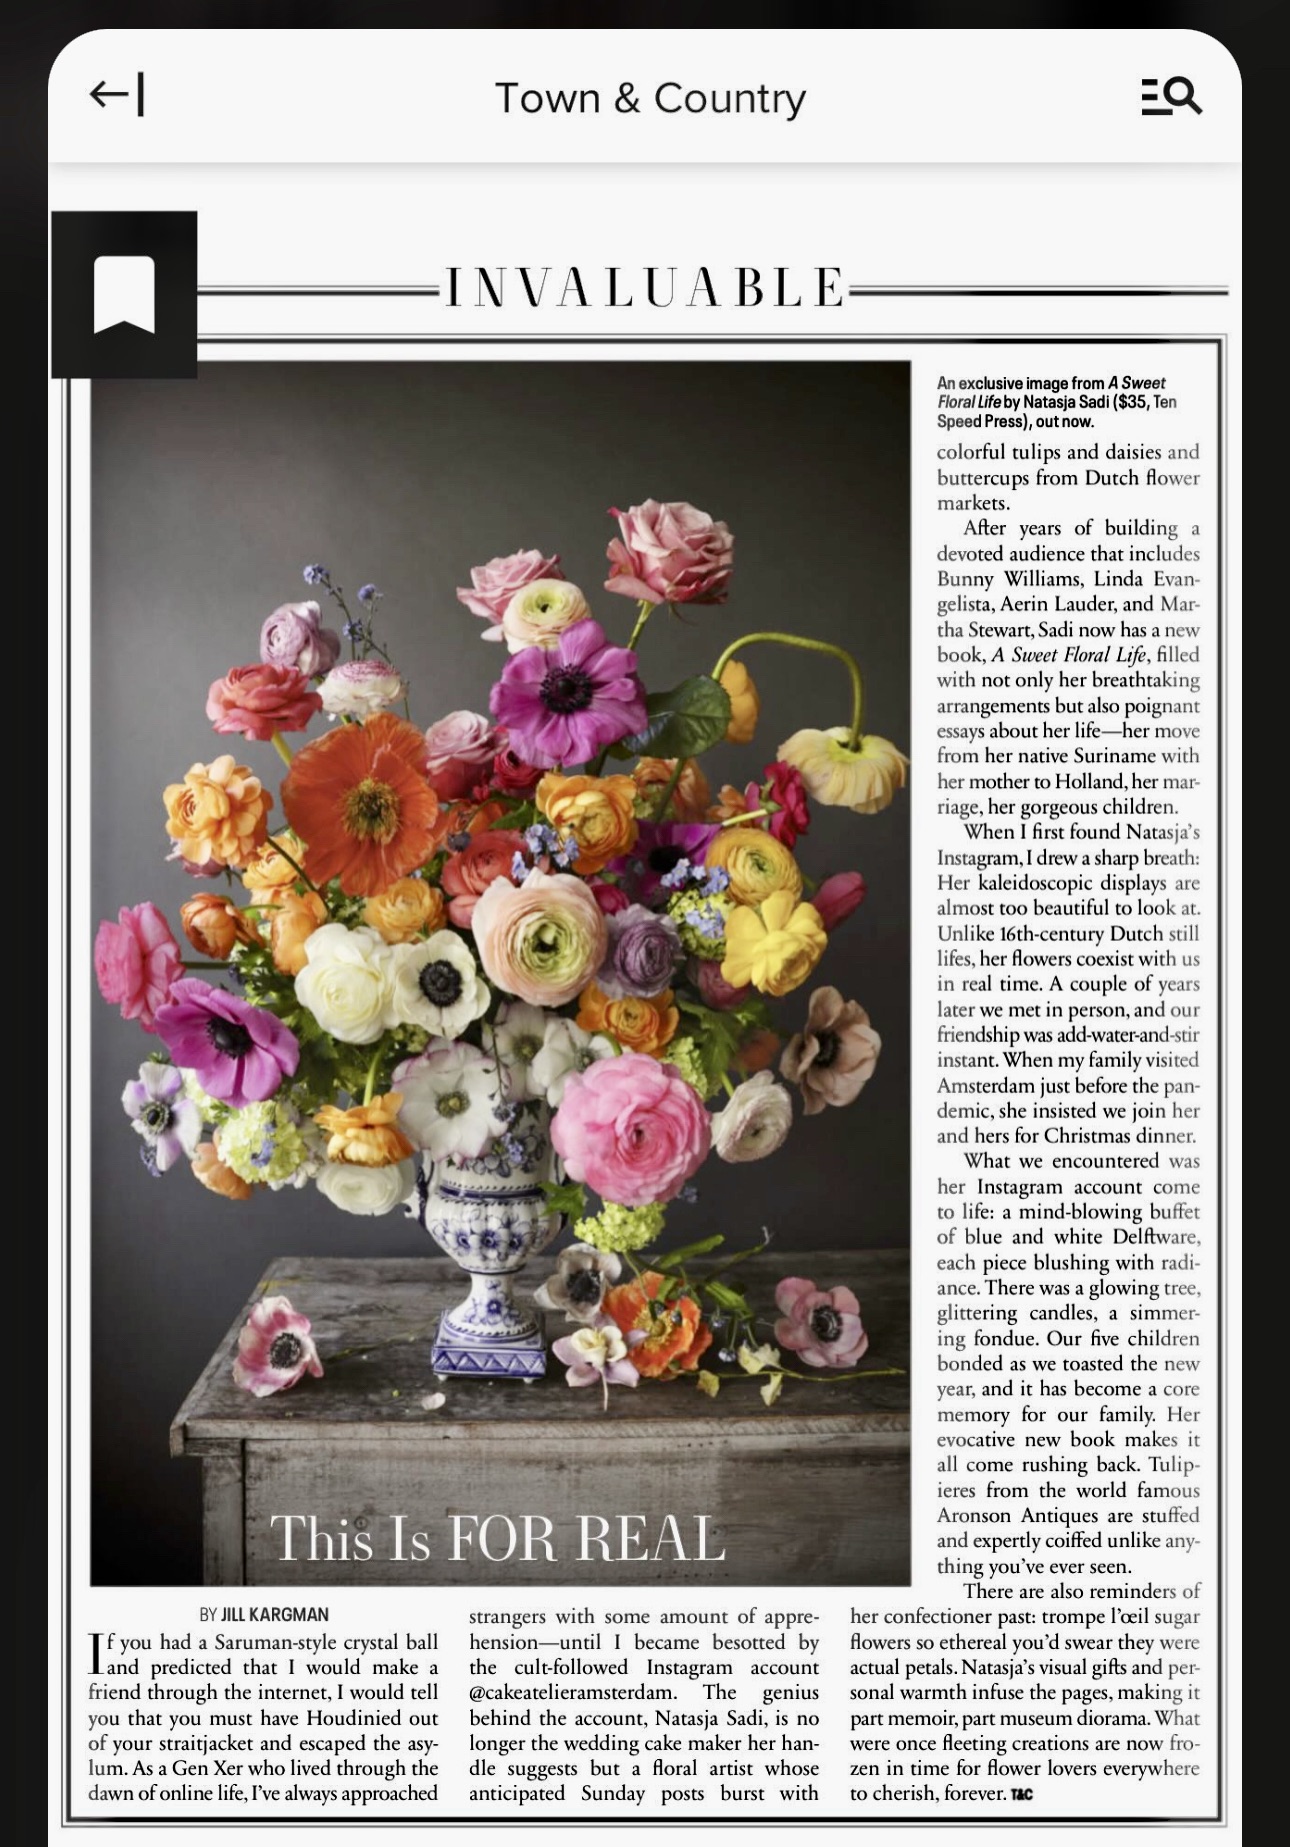 Town & Country Magazine on A Sweet Floral Life